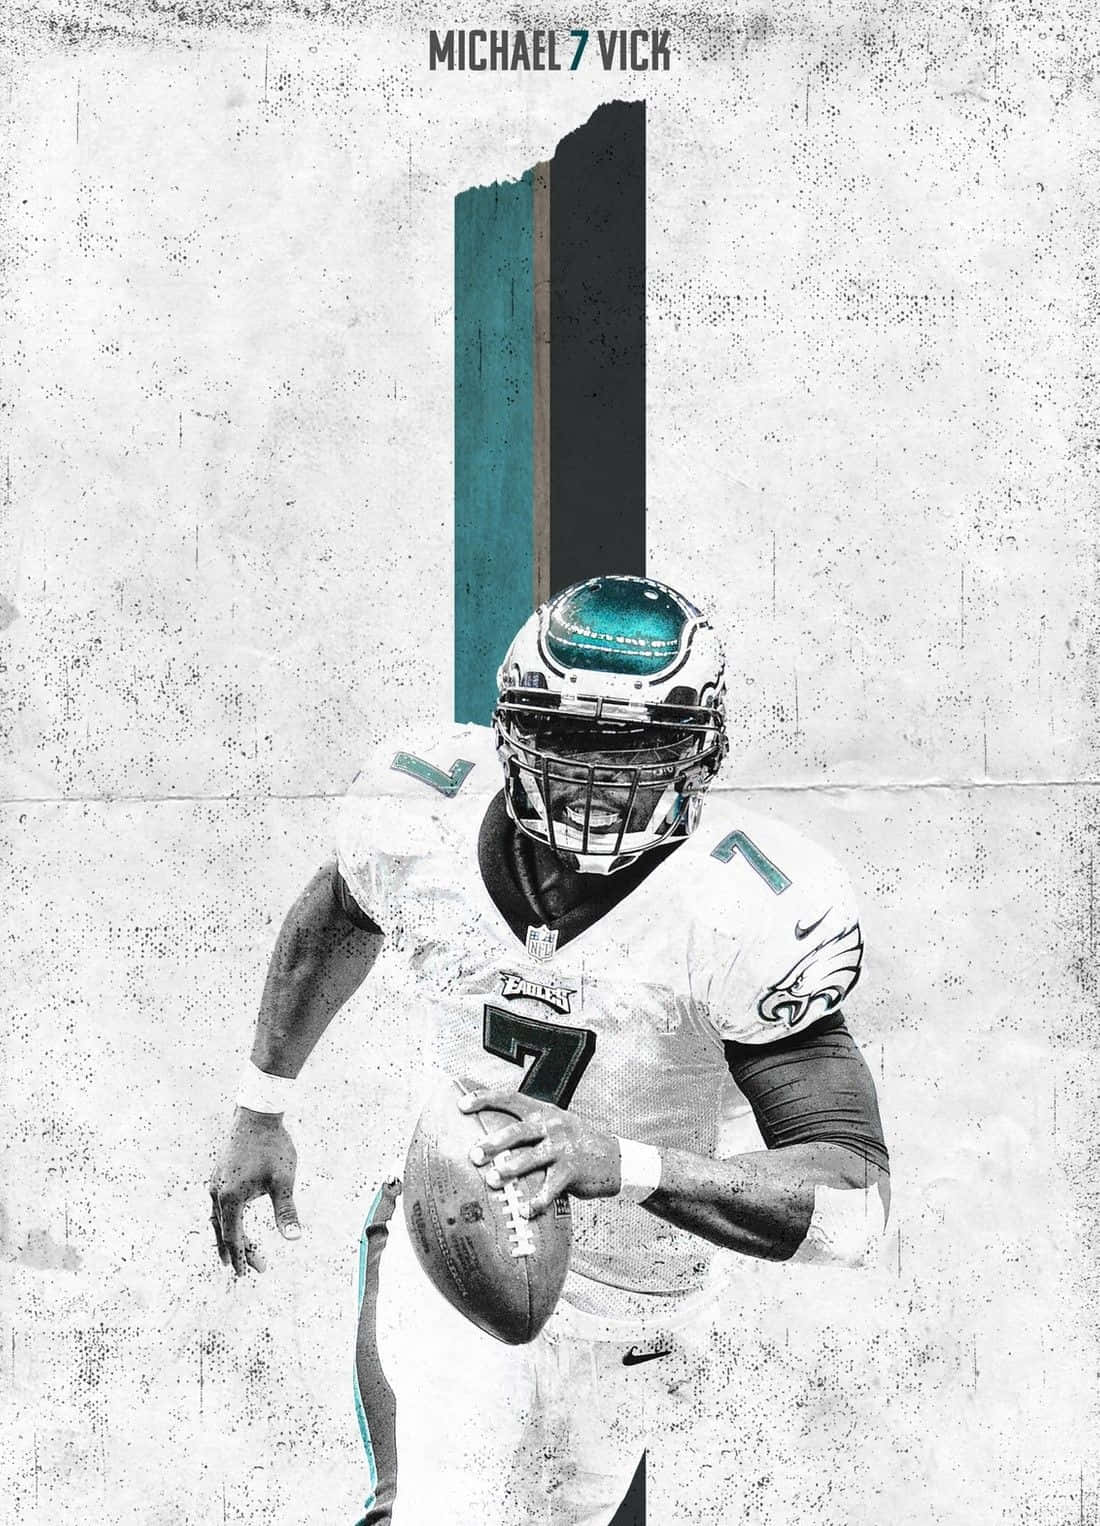 Michael Vick showing skill and determination Wallpaper